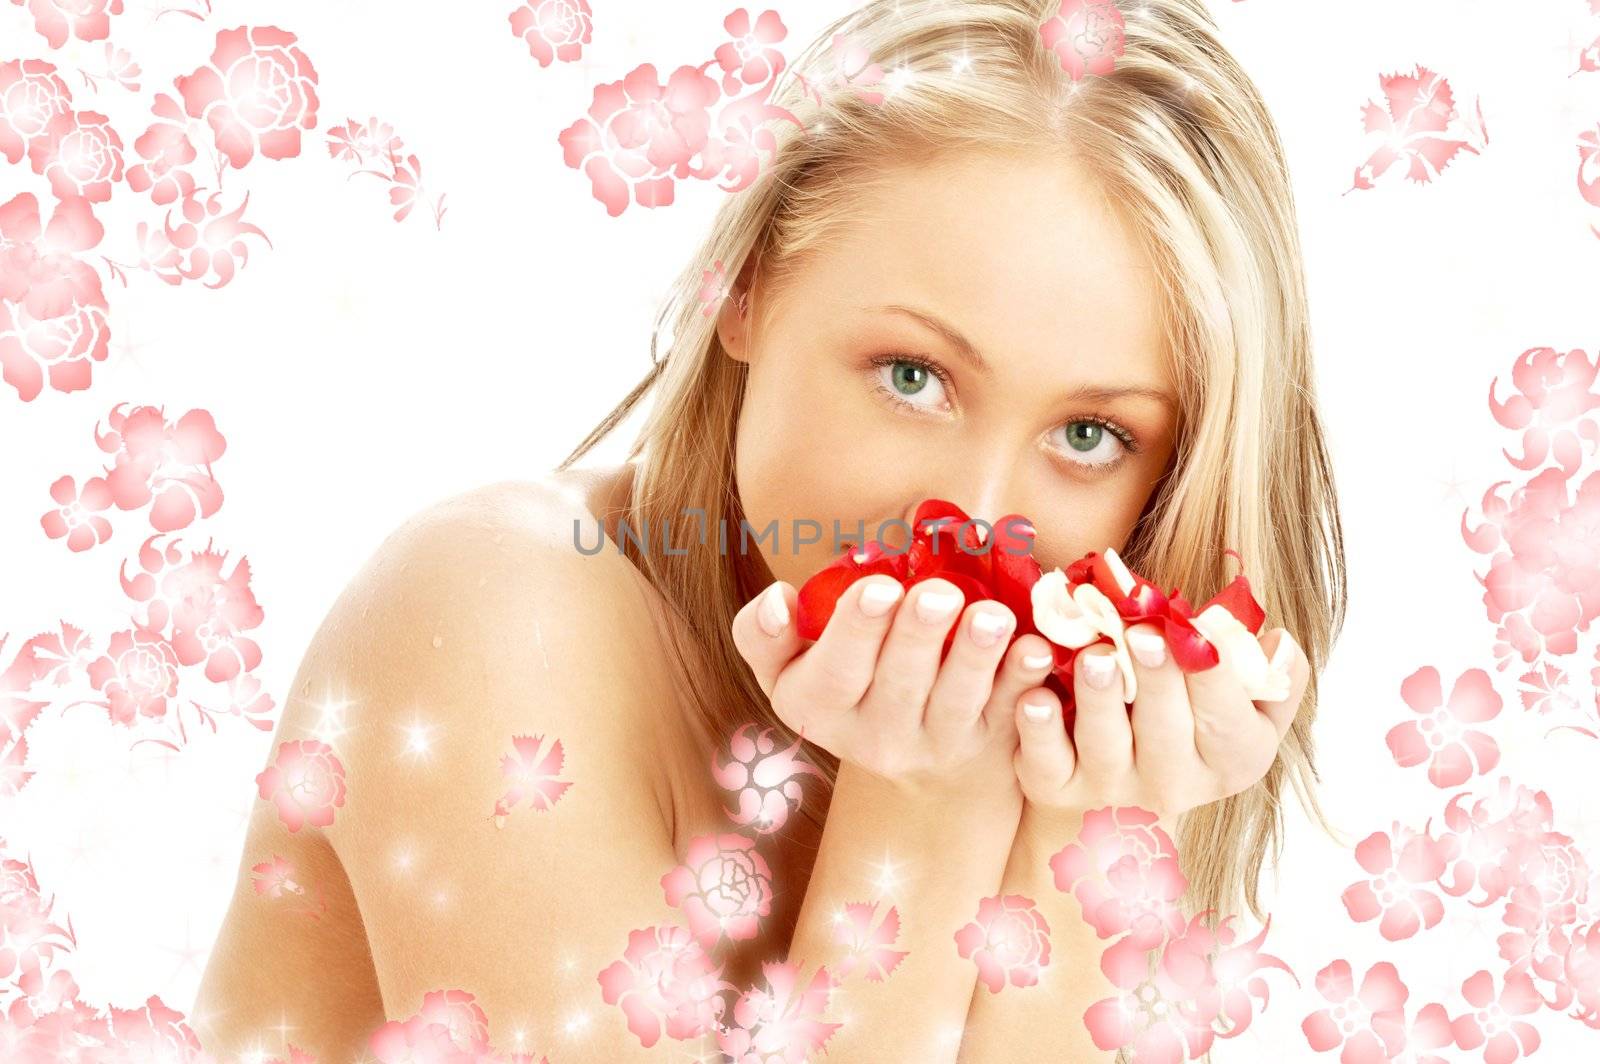 lovely blond with red and white rose petals and rendered flowers by dolgachov